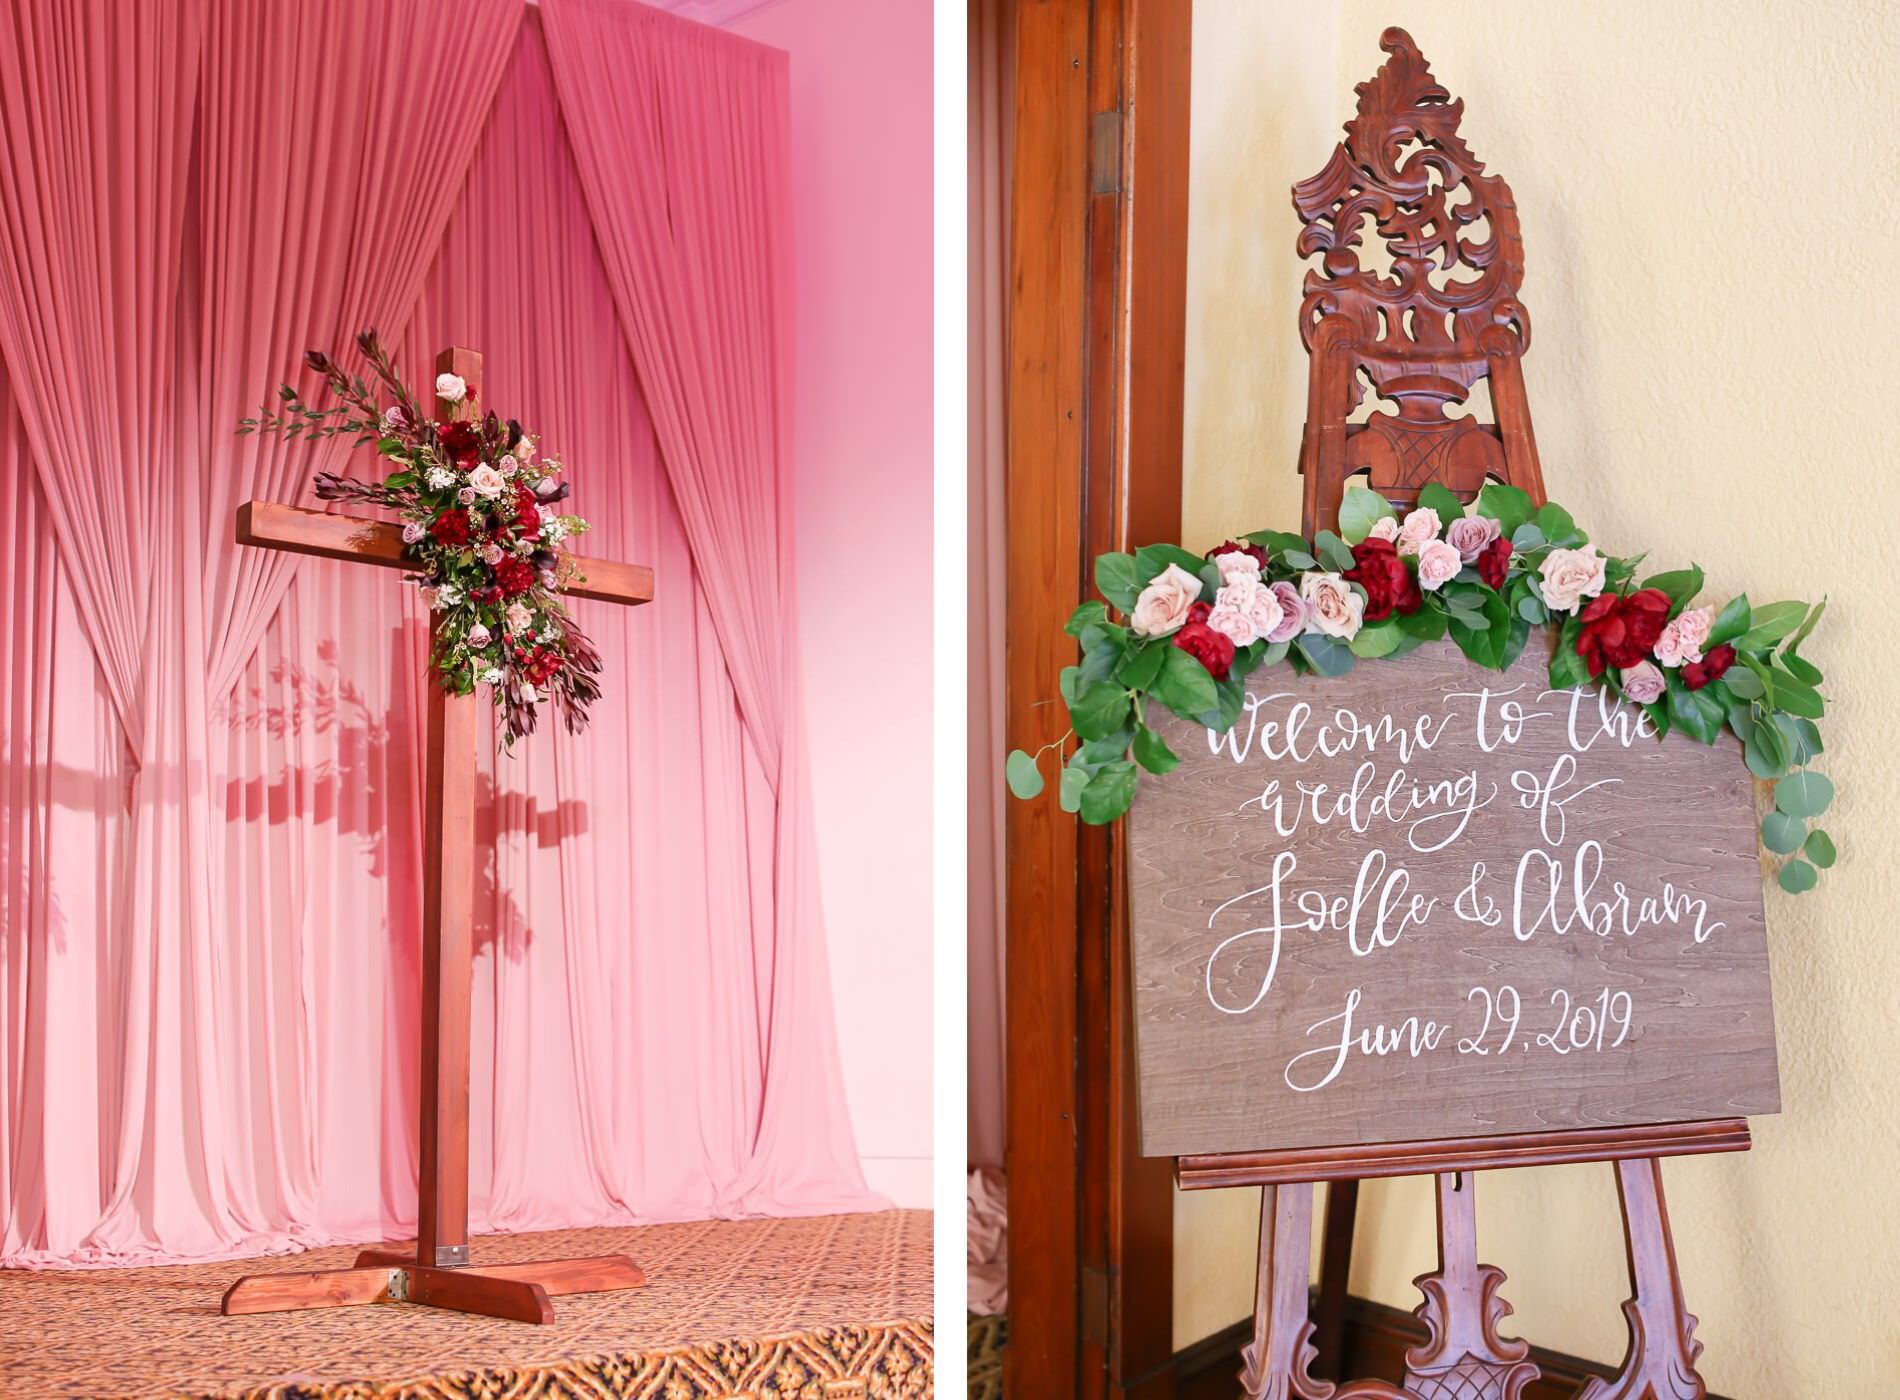 Romantic Religious Wedding Ceremony Decor, Wooden Cross with Flower Arrangement, Wooden Welcome Sign with Red and Blush Pink Roses, Greenery Leaves Garland | Wedding Photographer Lifelong Photography Studios | Tampa Bay Wedding Planner Blue Skies Weddings and Events | St. Petersburg Wedding Venue Bridgepoint Church | Dusty Rose Draping Gabro Event Services